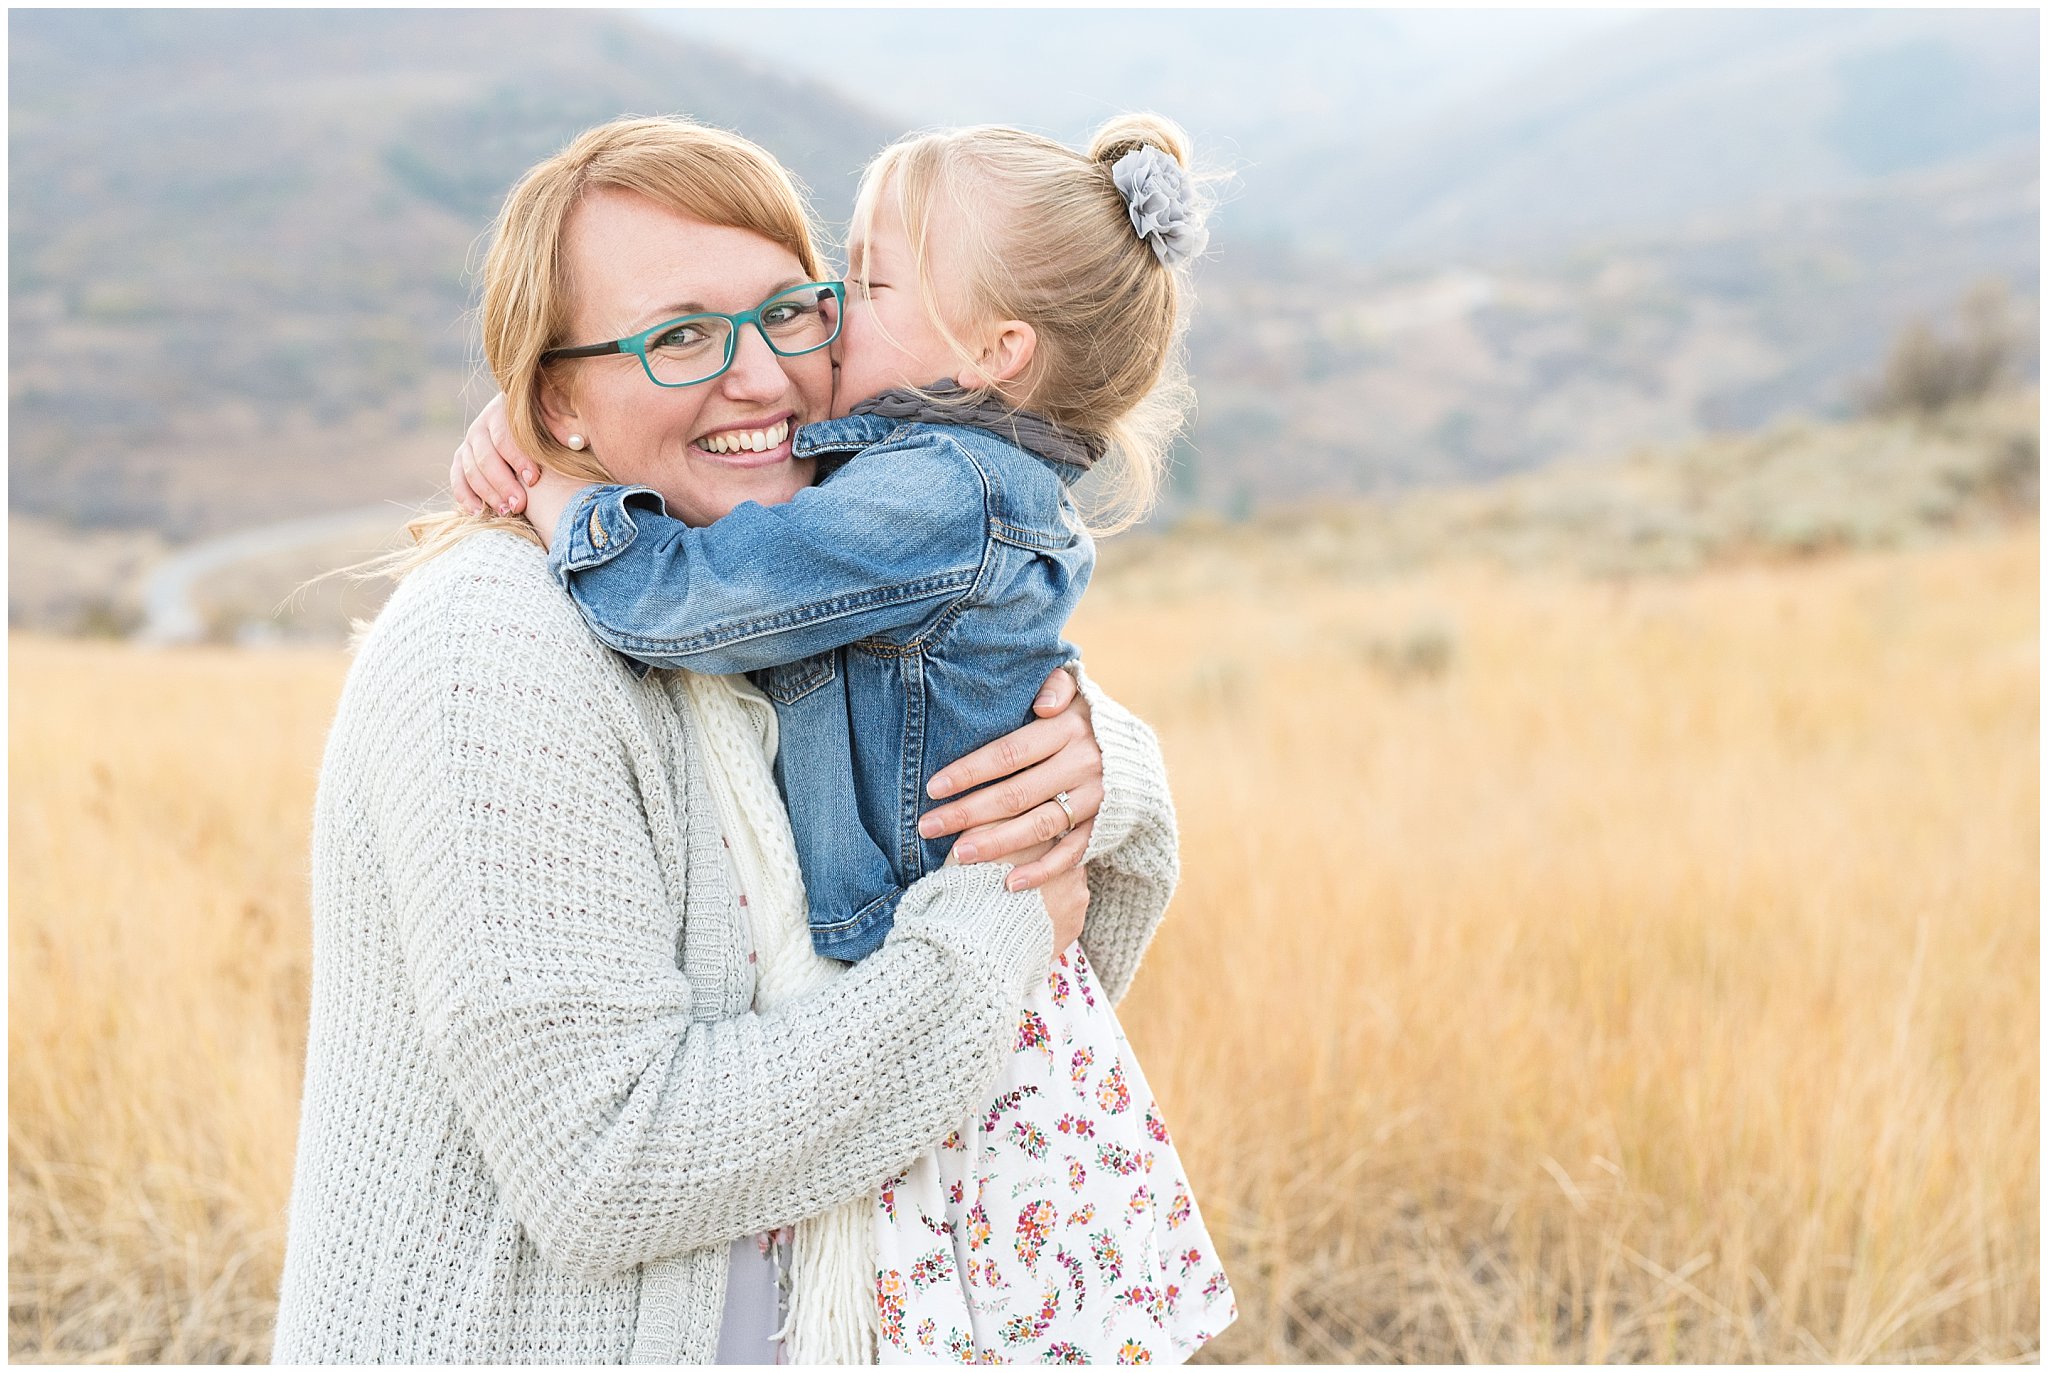 Daughter giving mom a kiss on the cheek | Fall Family Pictures in the Mountains | Snowbasin, Utah | Jessie and Dallin Photography